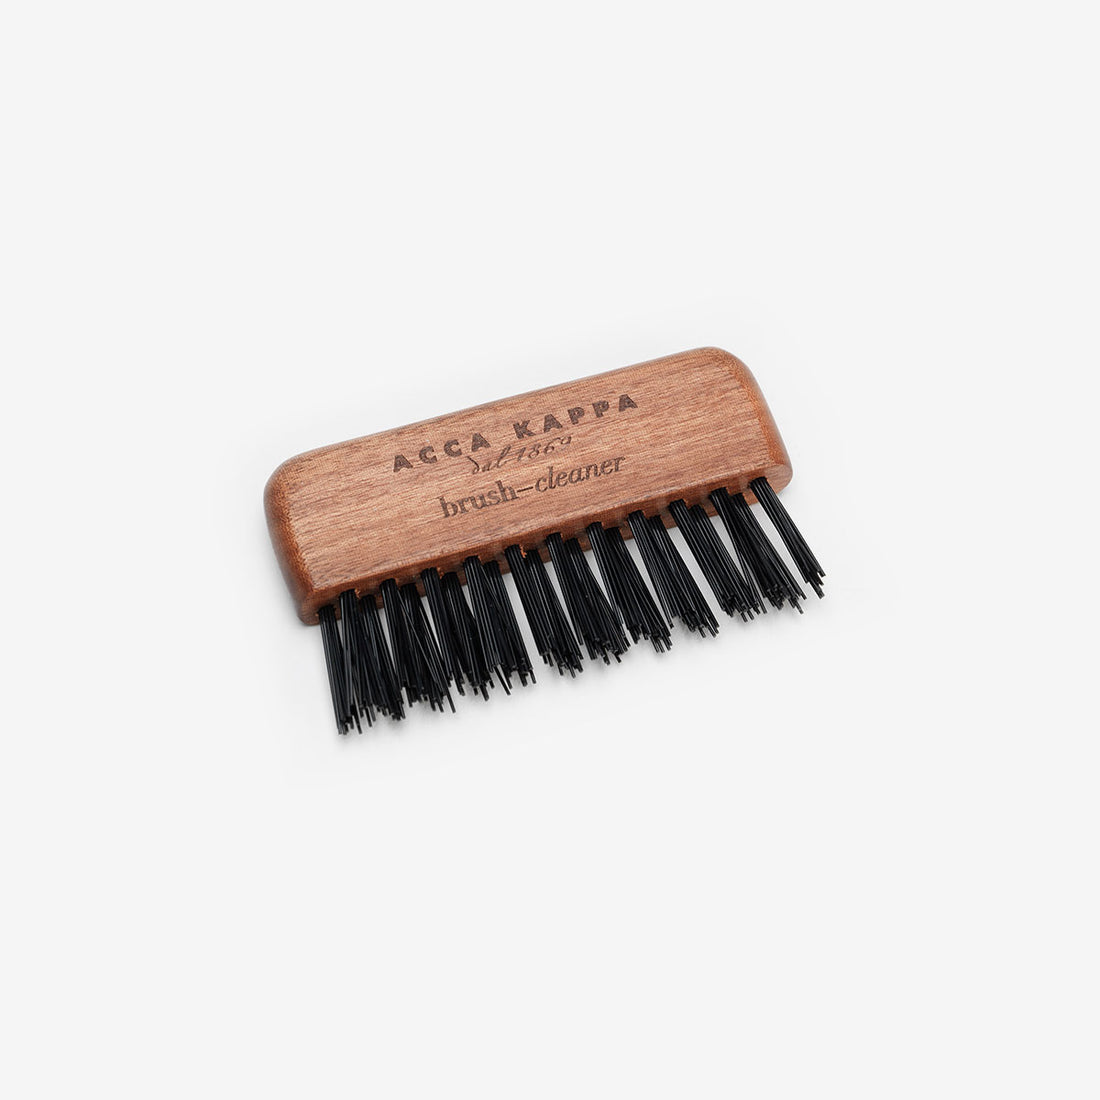 ACCA KAPPA Brush and Comb Cleaner